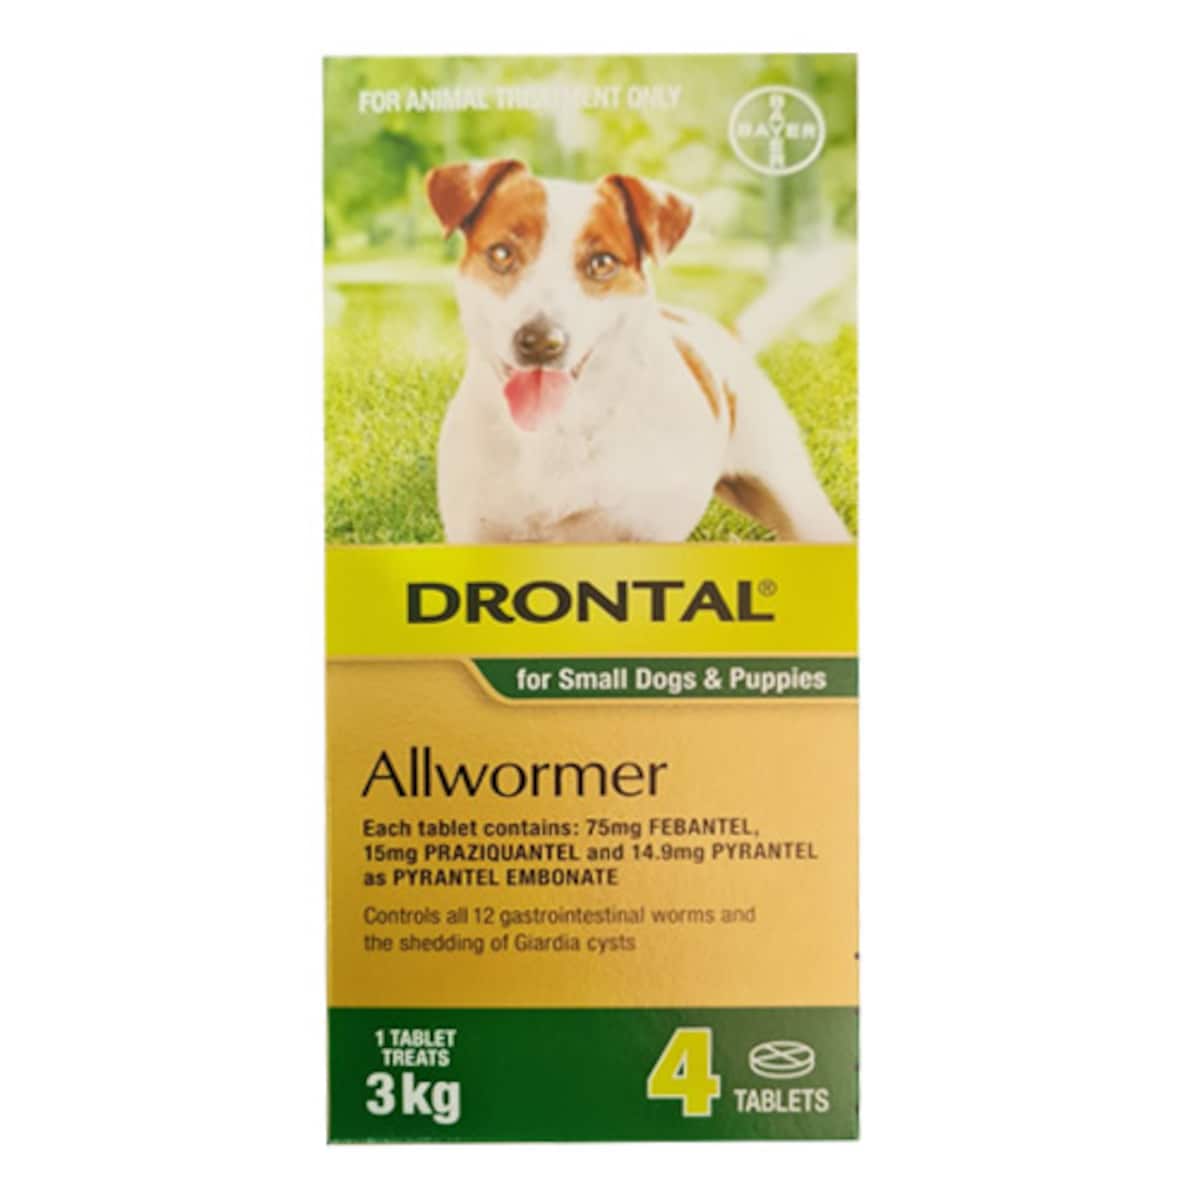 Drontal Allwormer for Small Dogs & Puppies 4 Tablets